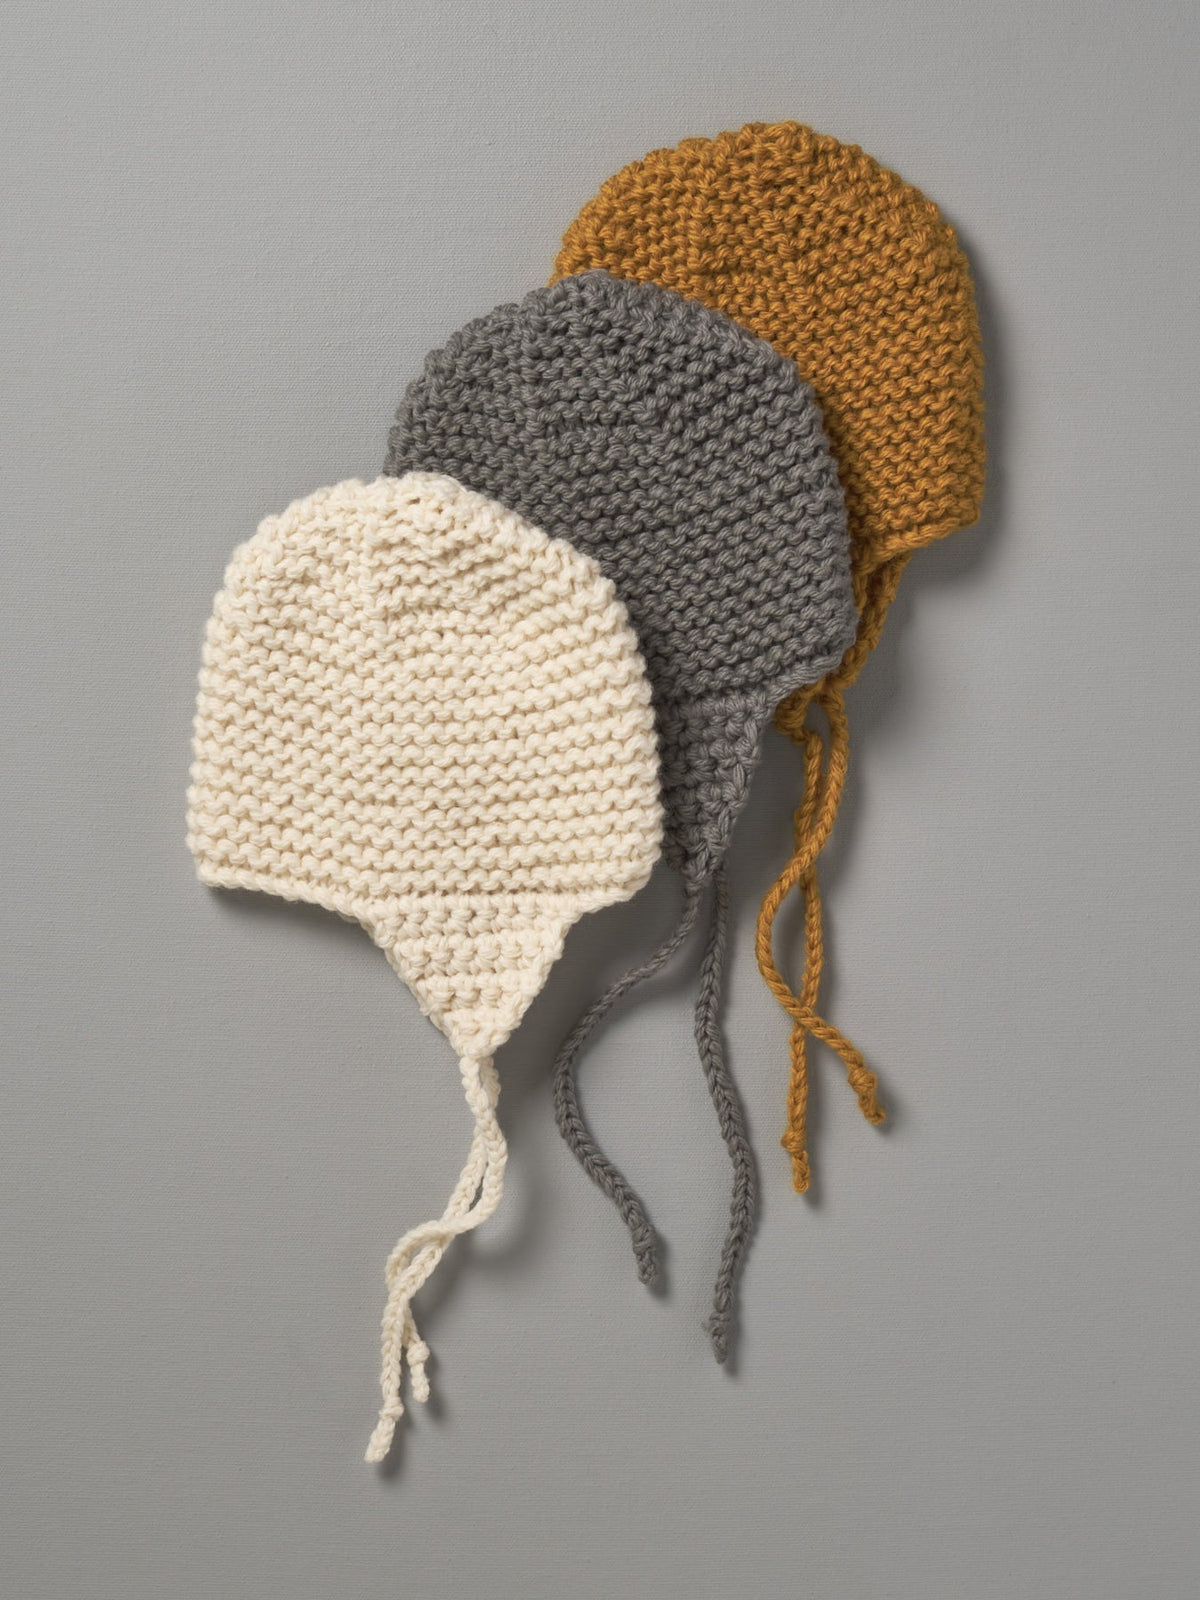 Three Weebits Hand Knitted Chunky Knit Hats - Mushroom on a grey background.